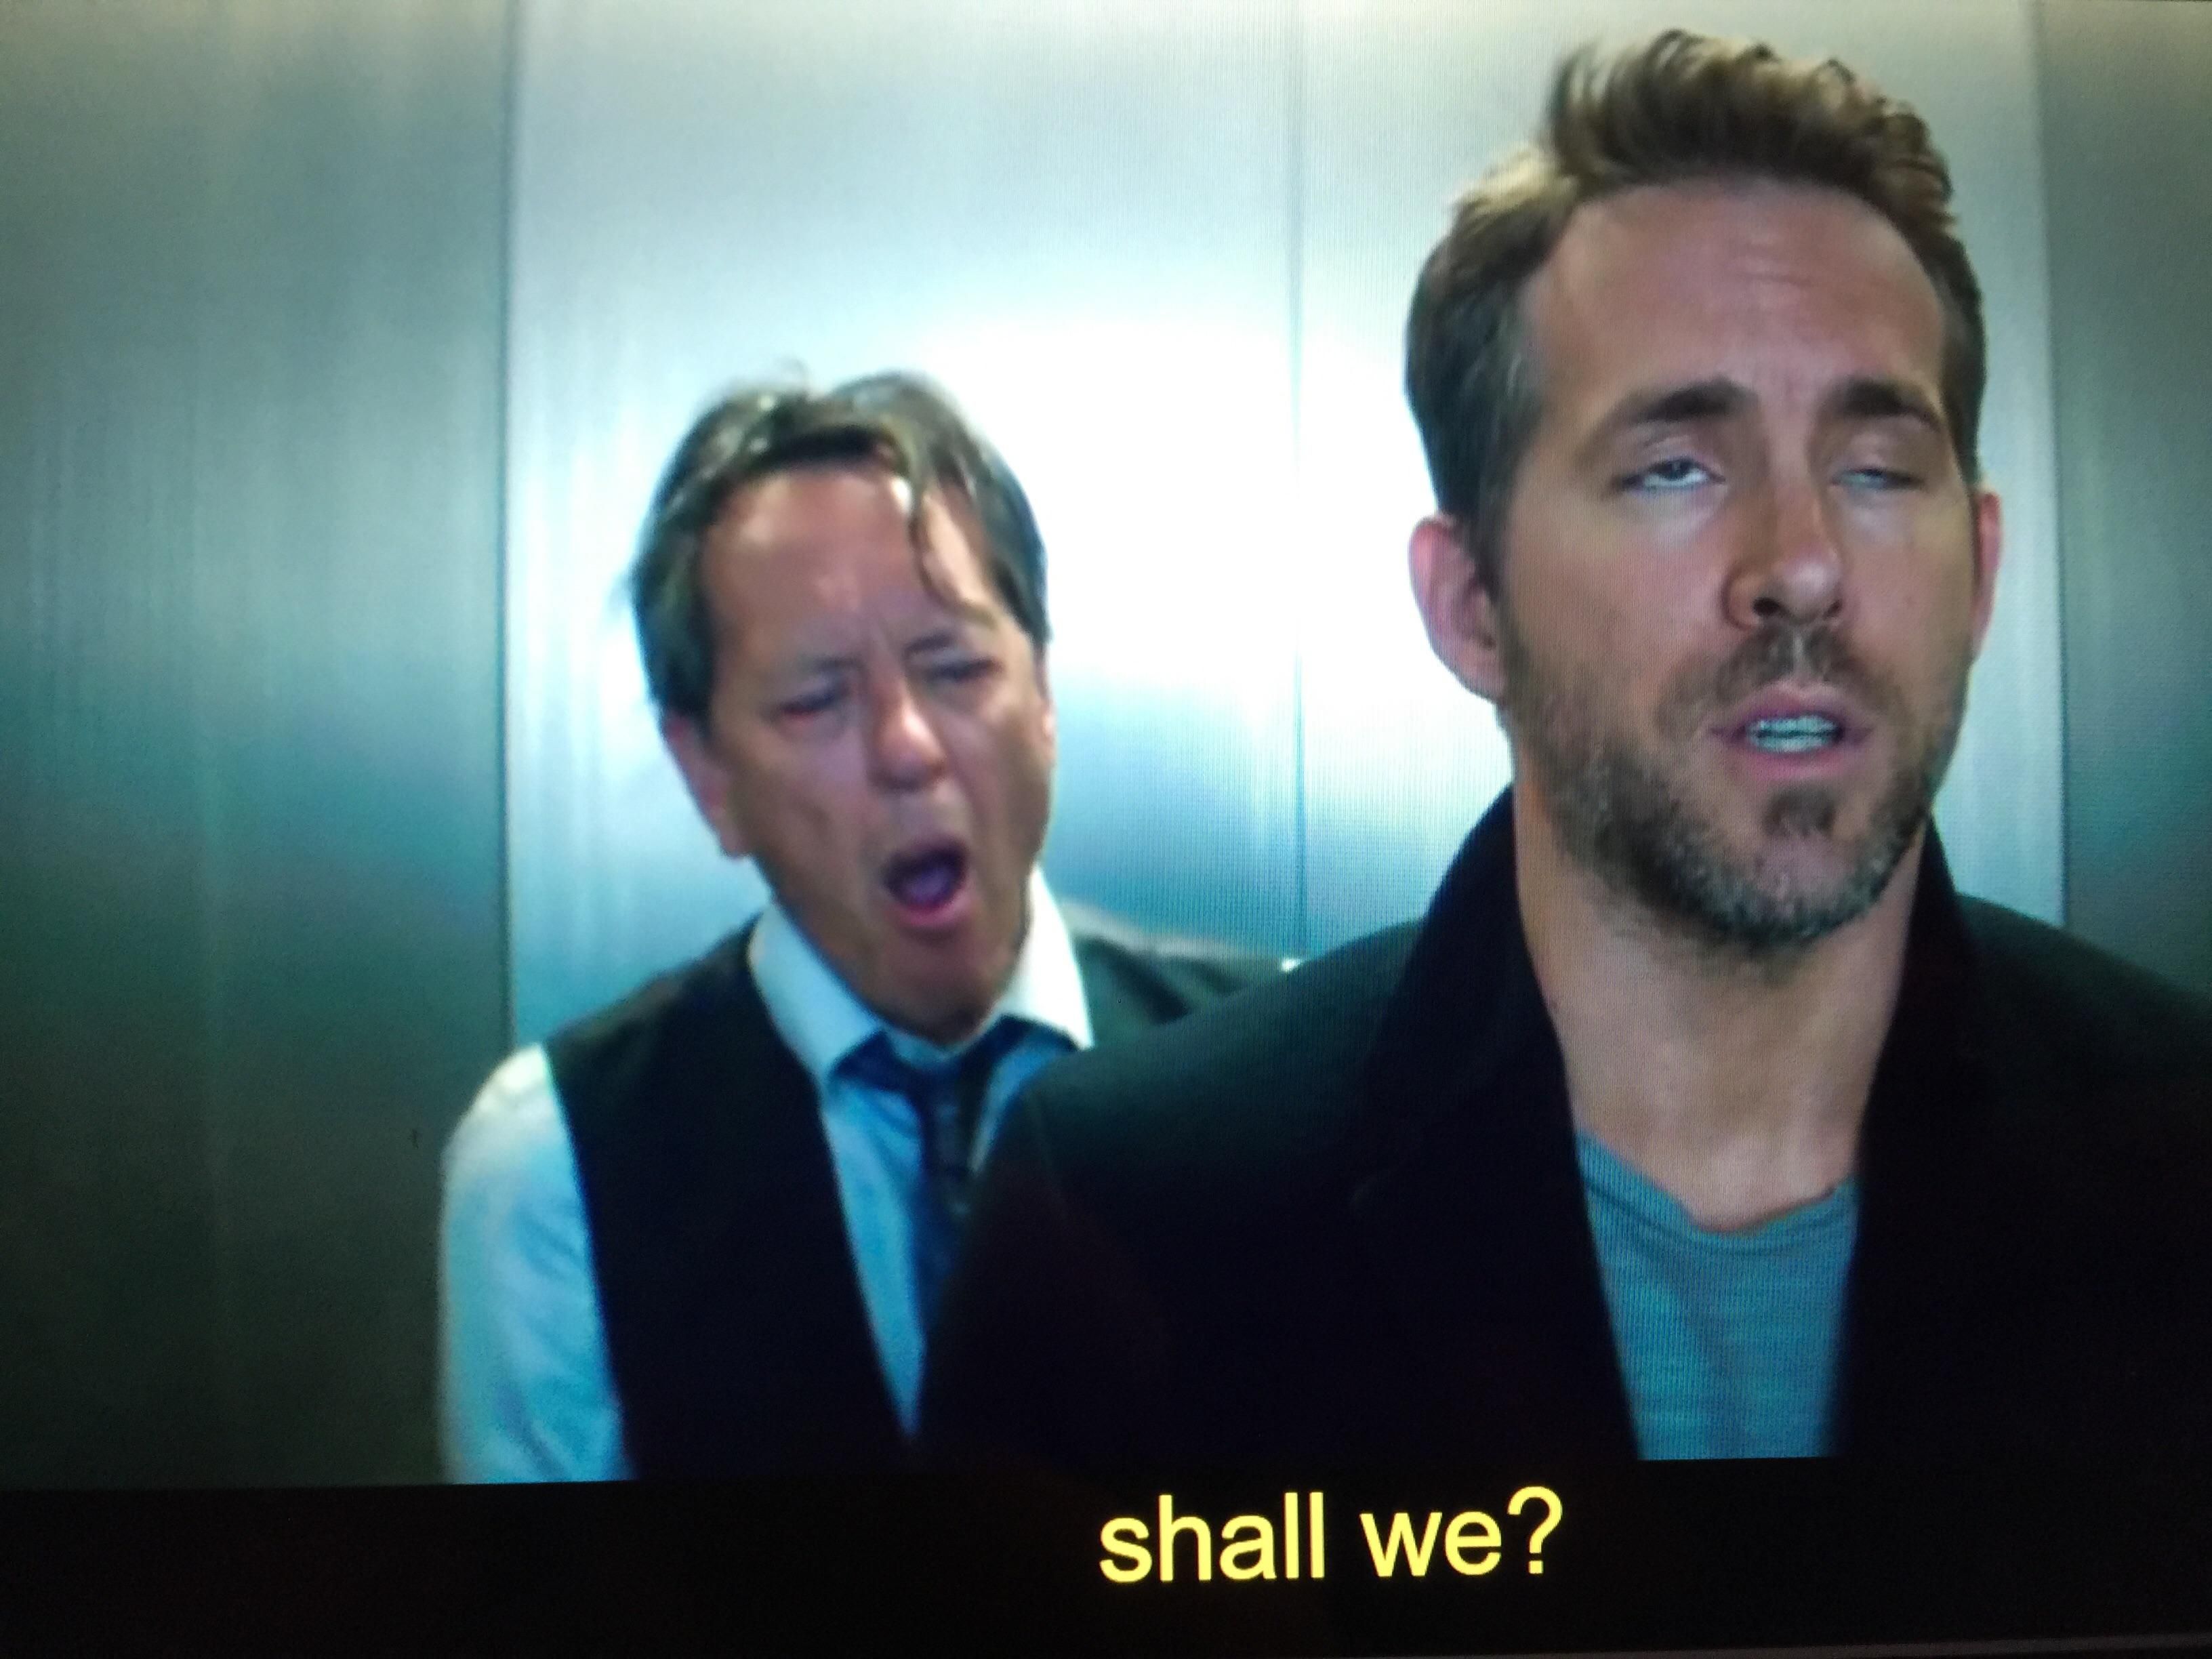 Paused my movie and had a laugh at how the subtitles and the scene lined up